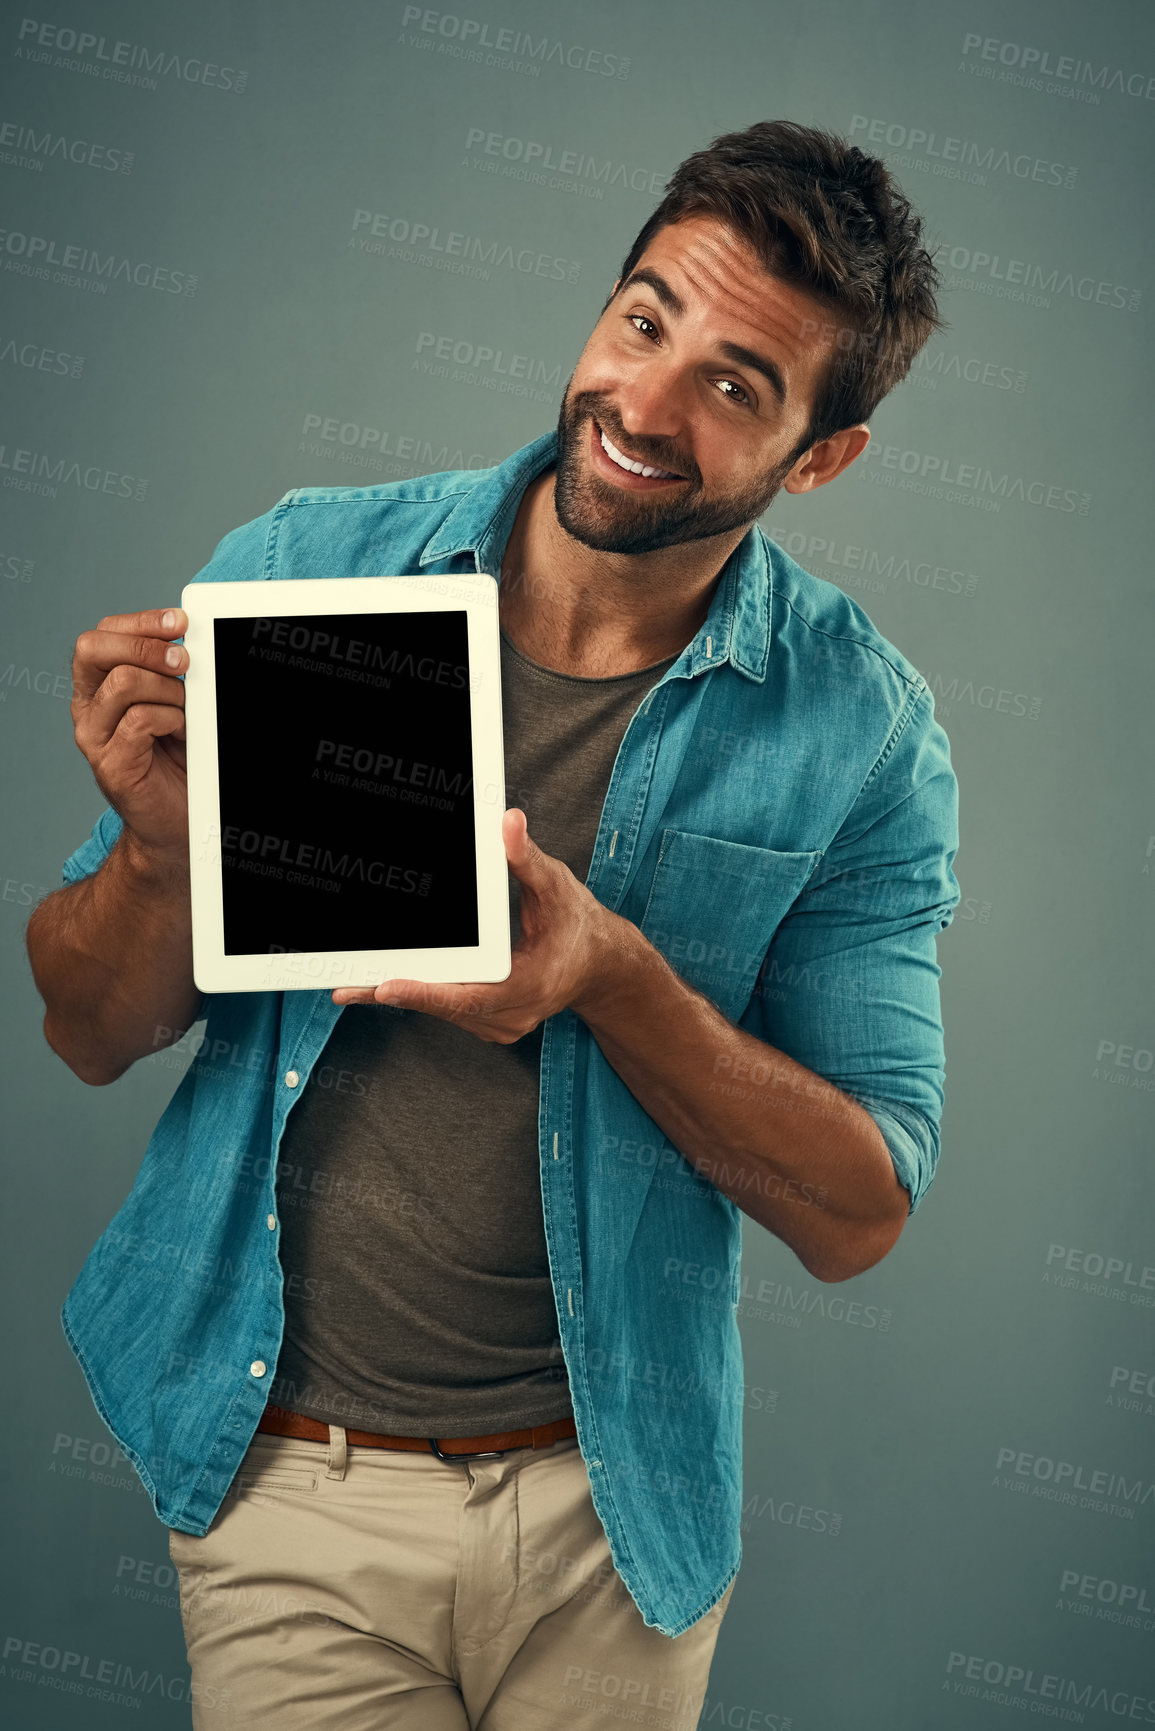 Buy stock photo Happy man, tablet and mockup screen for advertising, marketing or branding against a grey studio background. Portrait of male person showing technology display or mock up space for advertisement